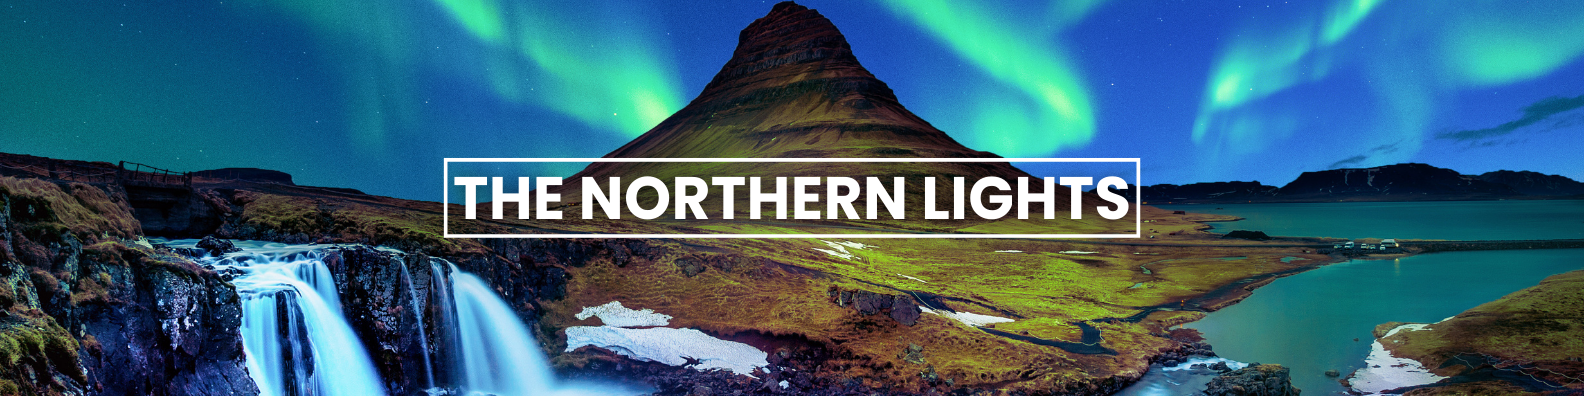 the northern lights are shining over a waterfall and a mountain . Barter's Travelnet 